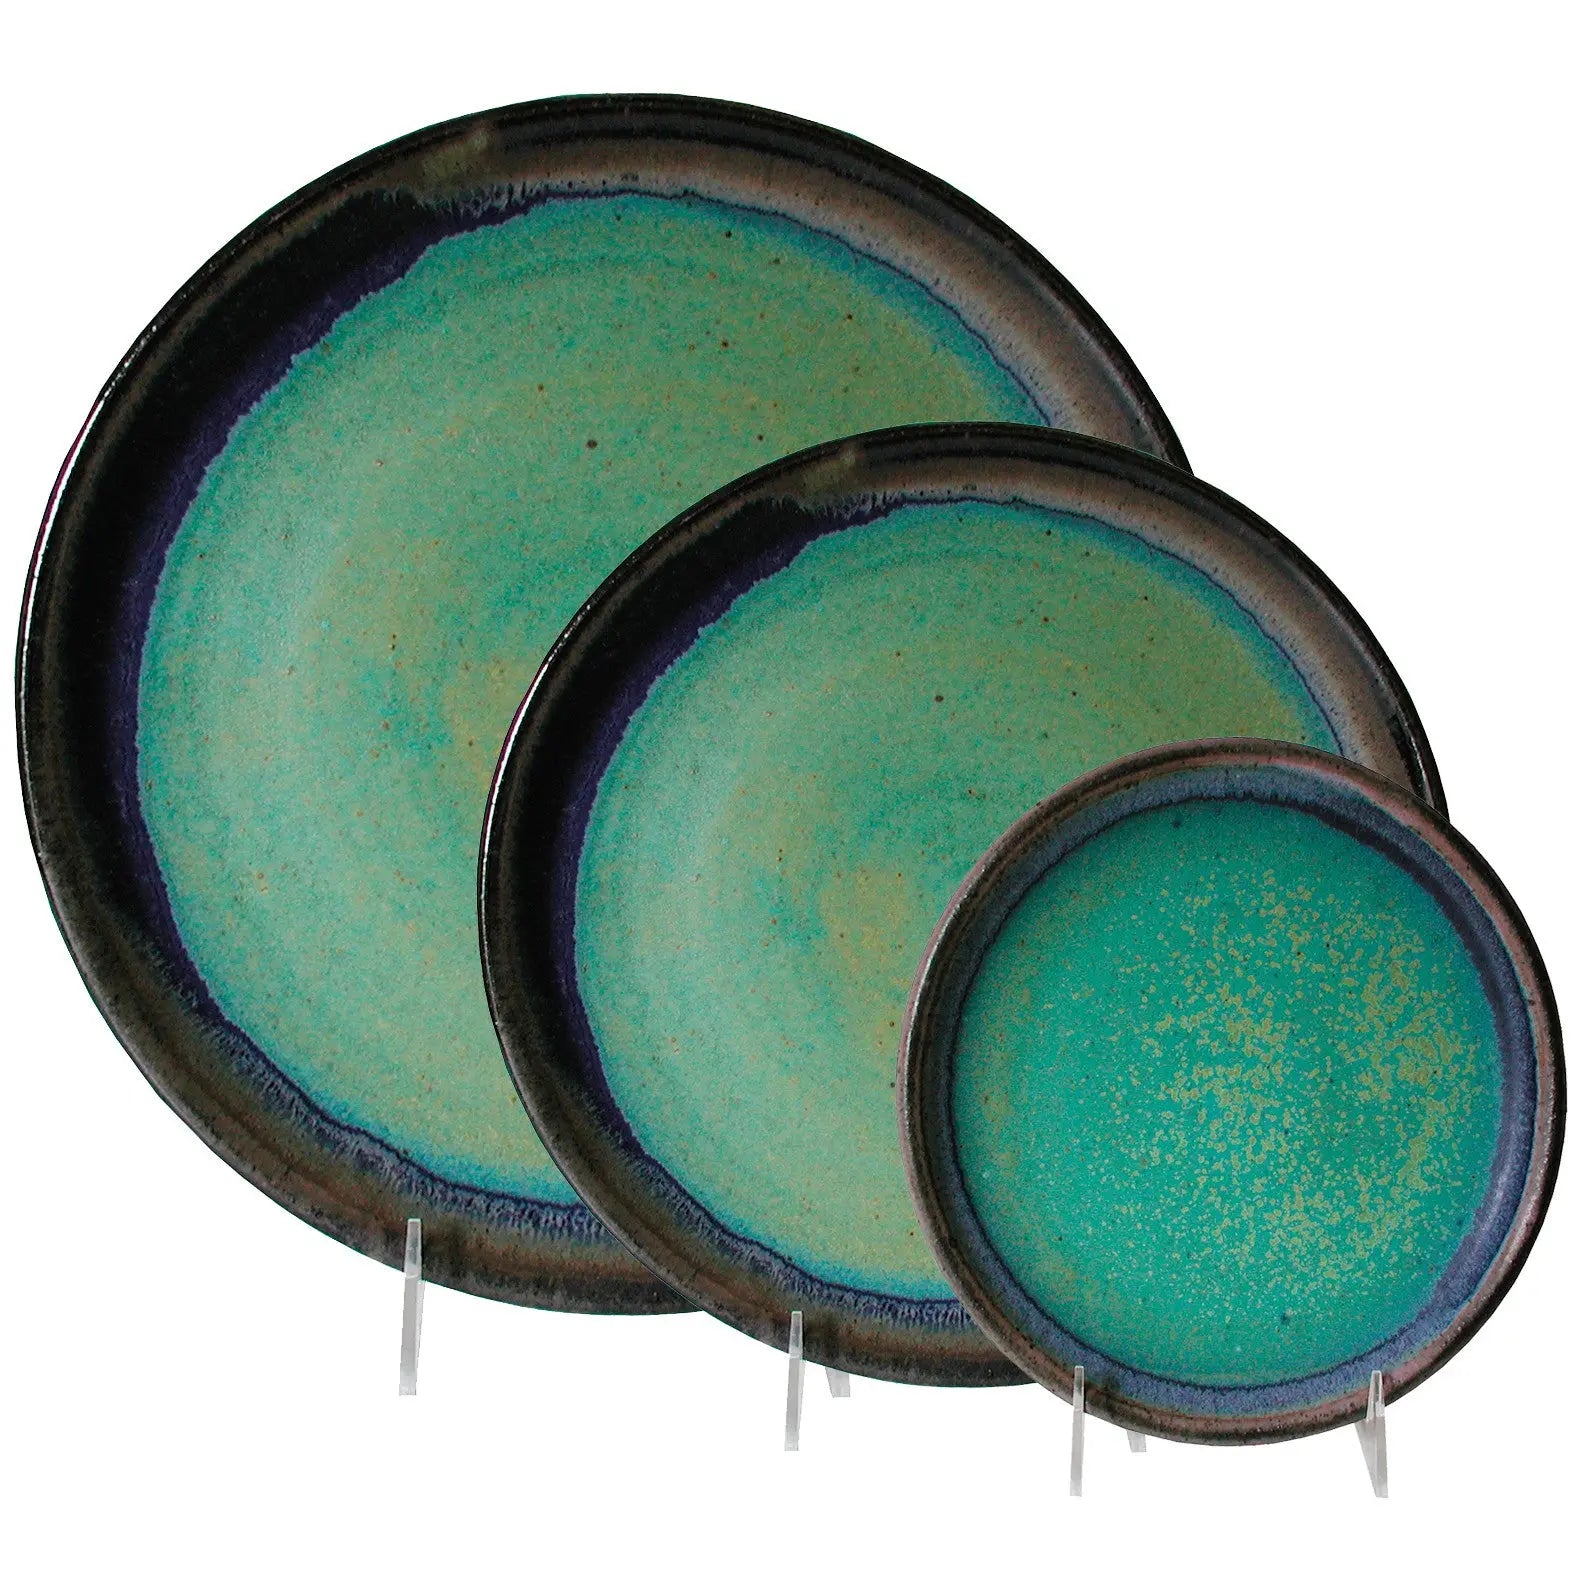 https://www.sweetheartgallery.com/cdn/shop/products/Maishe-Dickman-Hand-Thrown-Stoneware-Turquoise-Plates_-Dinnerware_-Place-Setting_-Artistic-Artisan-Pottery_9f84b4bd-96d8-41ed-a674-073d9eecc504.jpg?v=1477942894